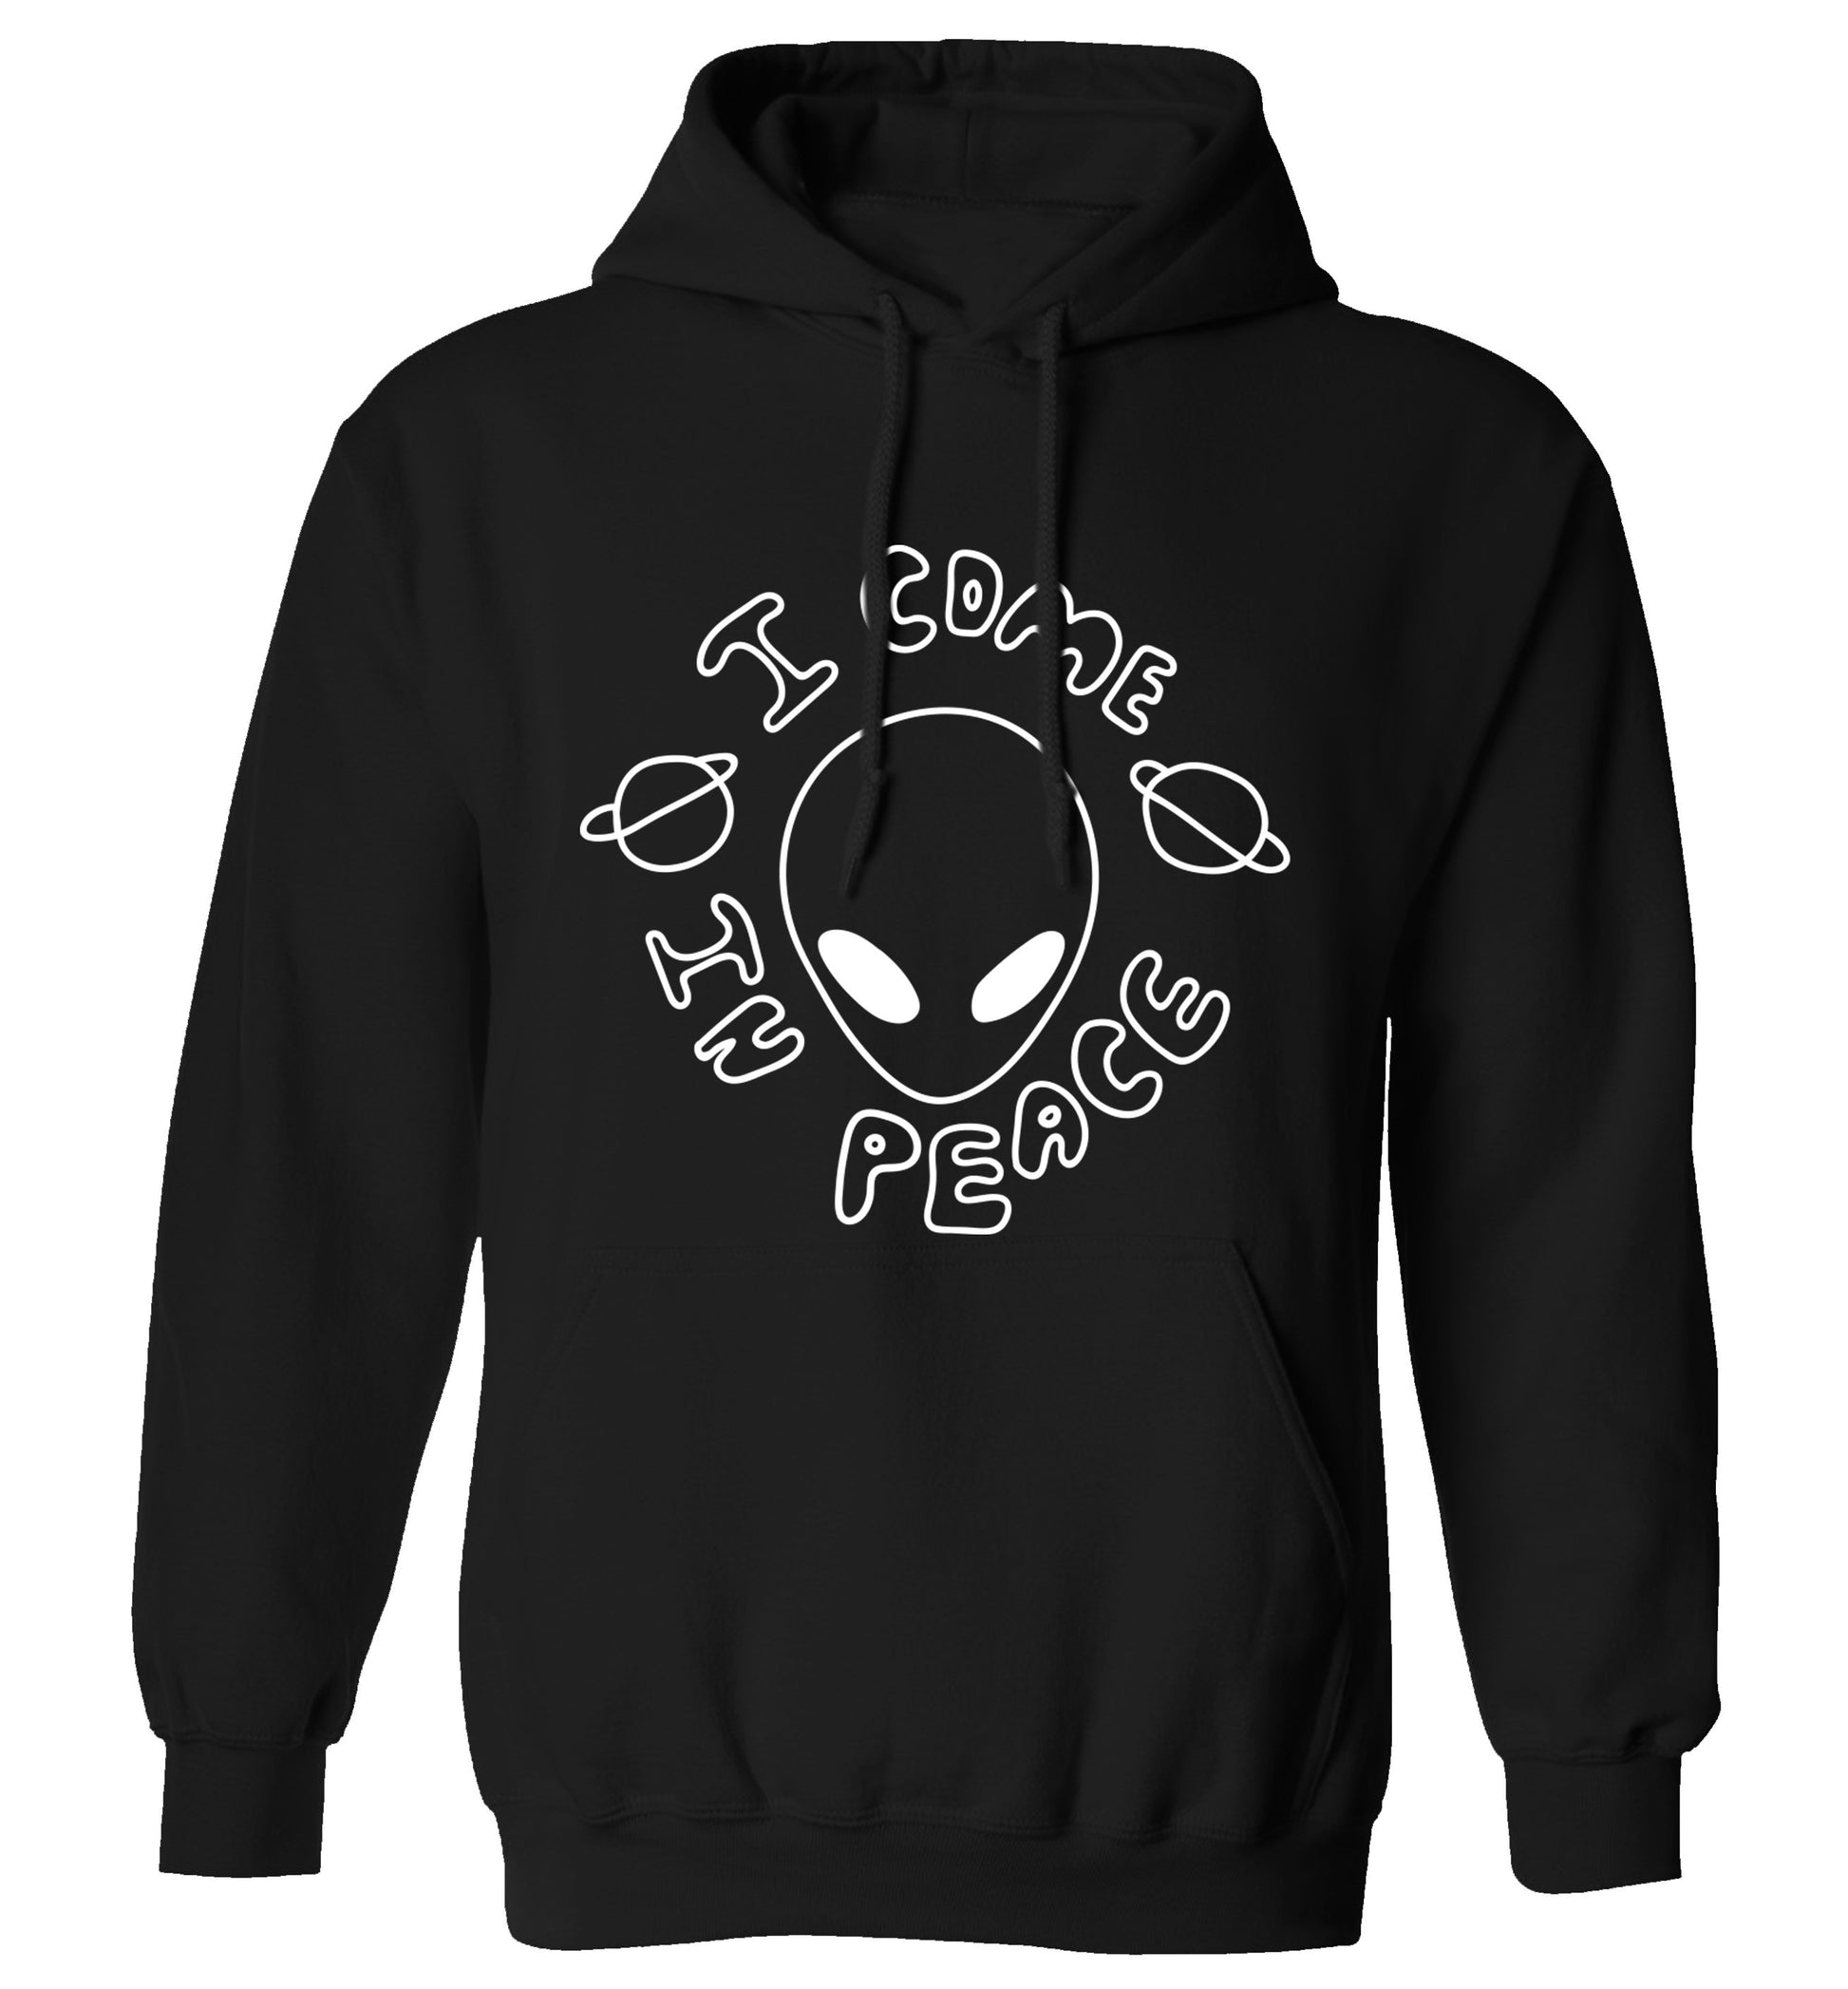 I come in peace adults unisex black hoodie 2XL